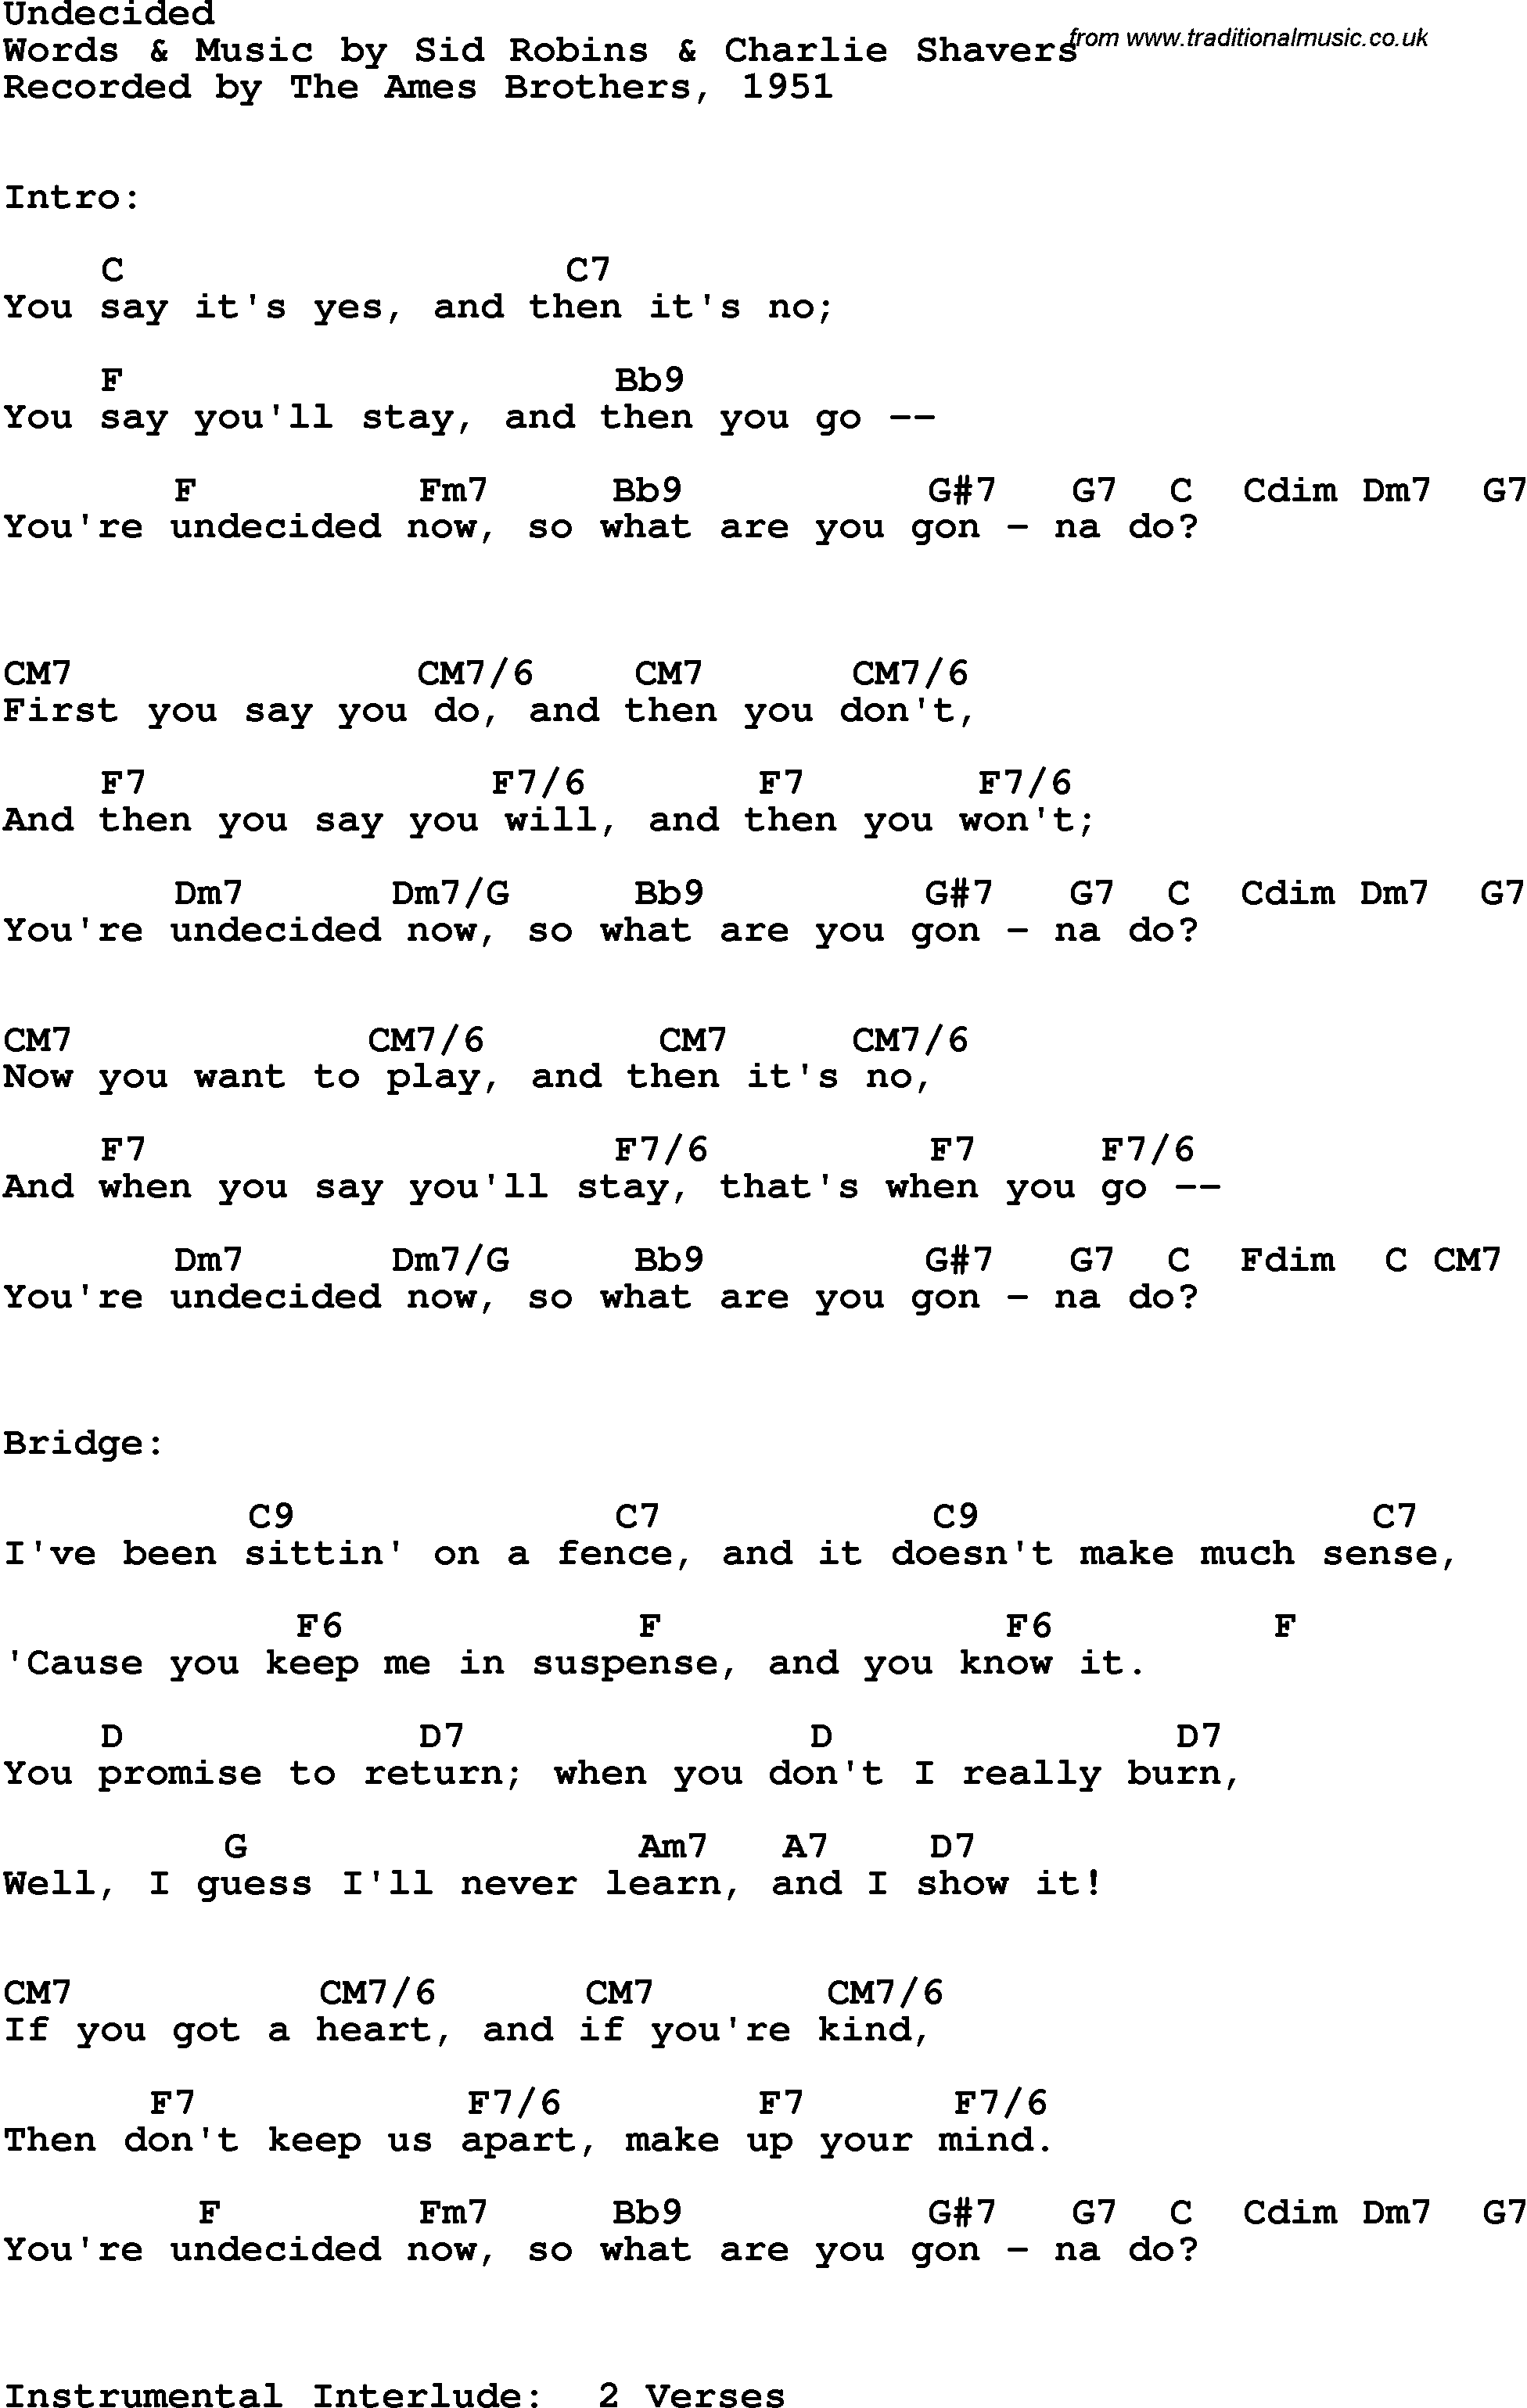 Song Lyrics with guitar chords for Undecided - The Ames Brothers, 1951